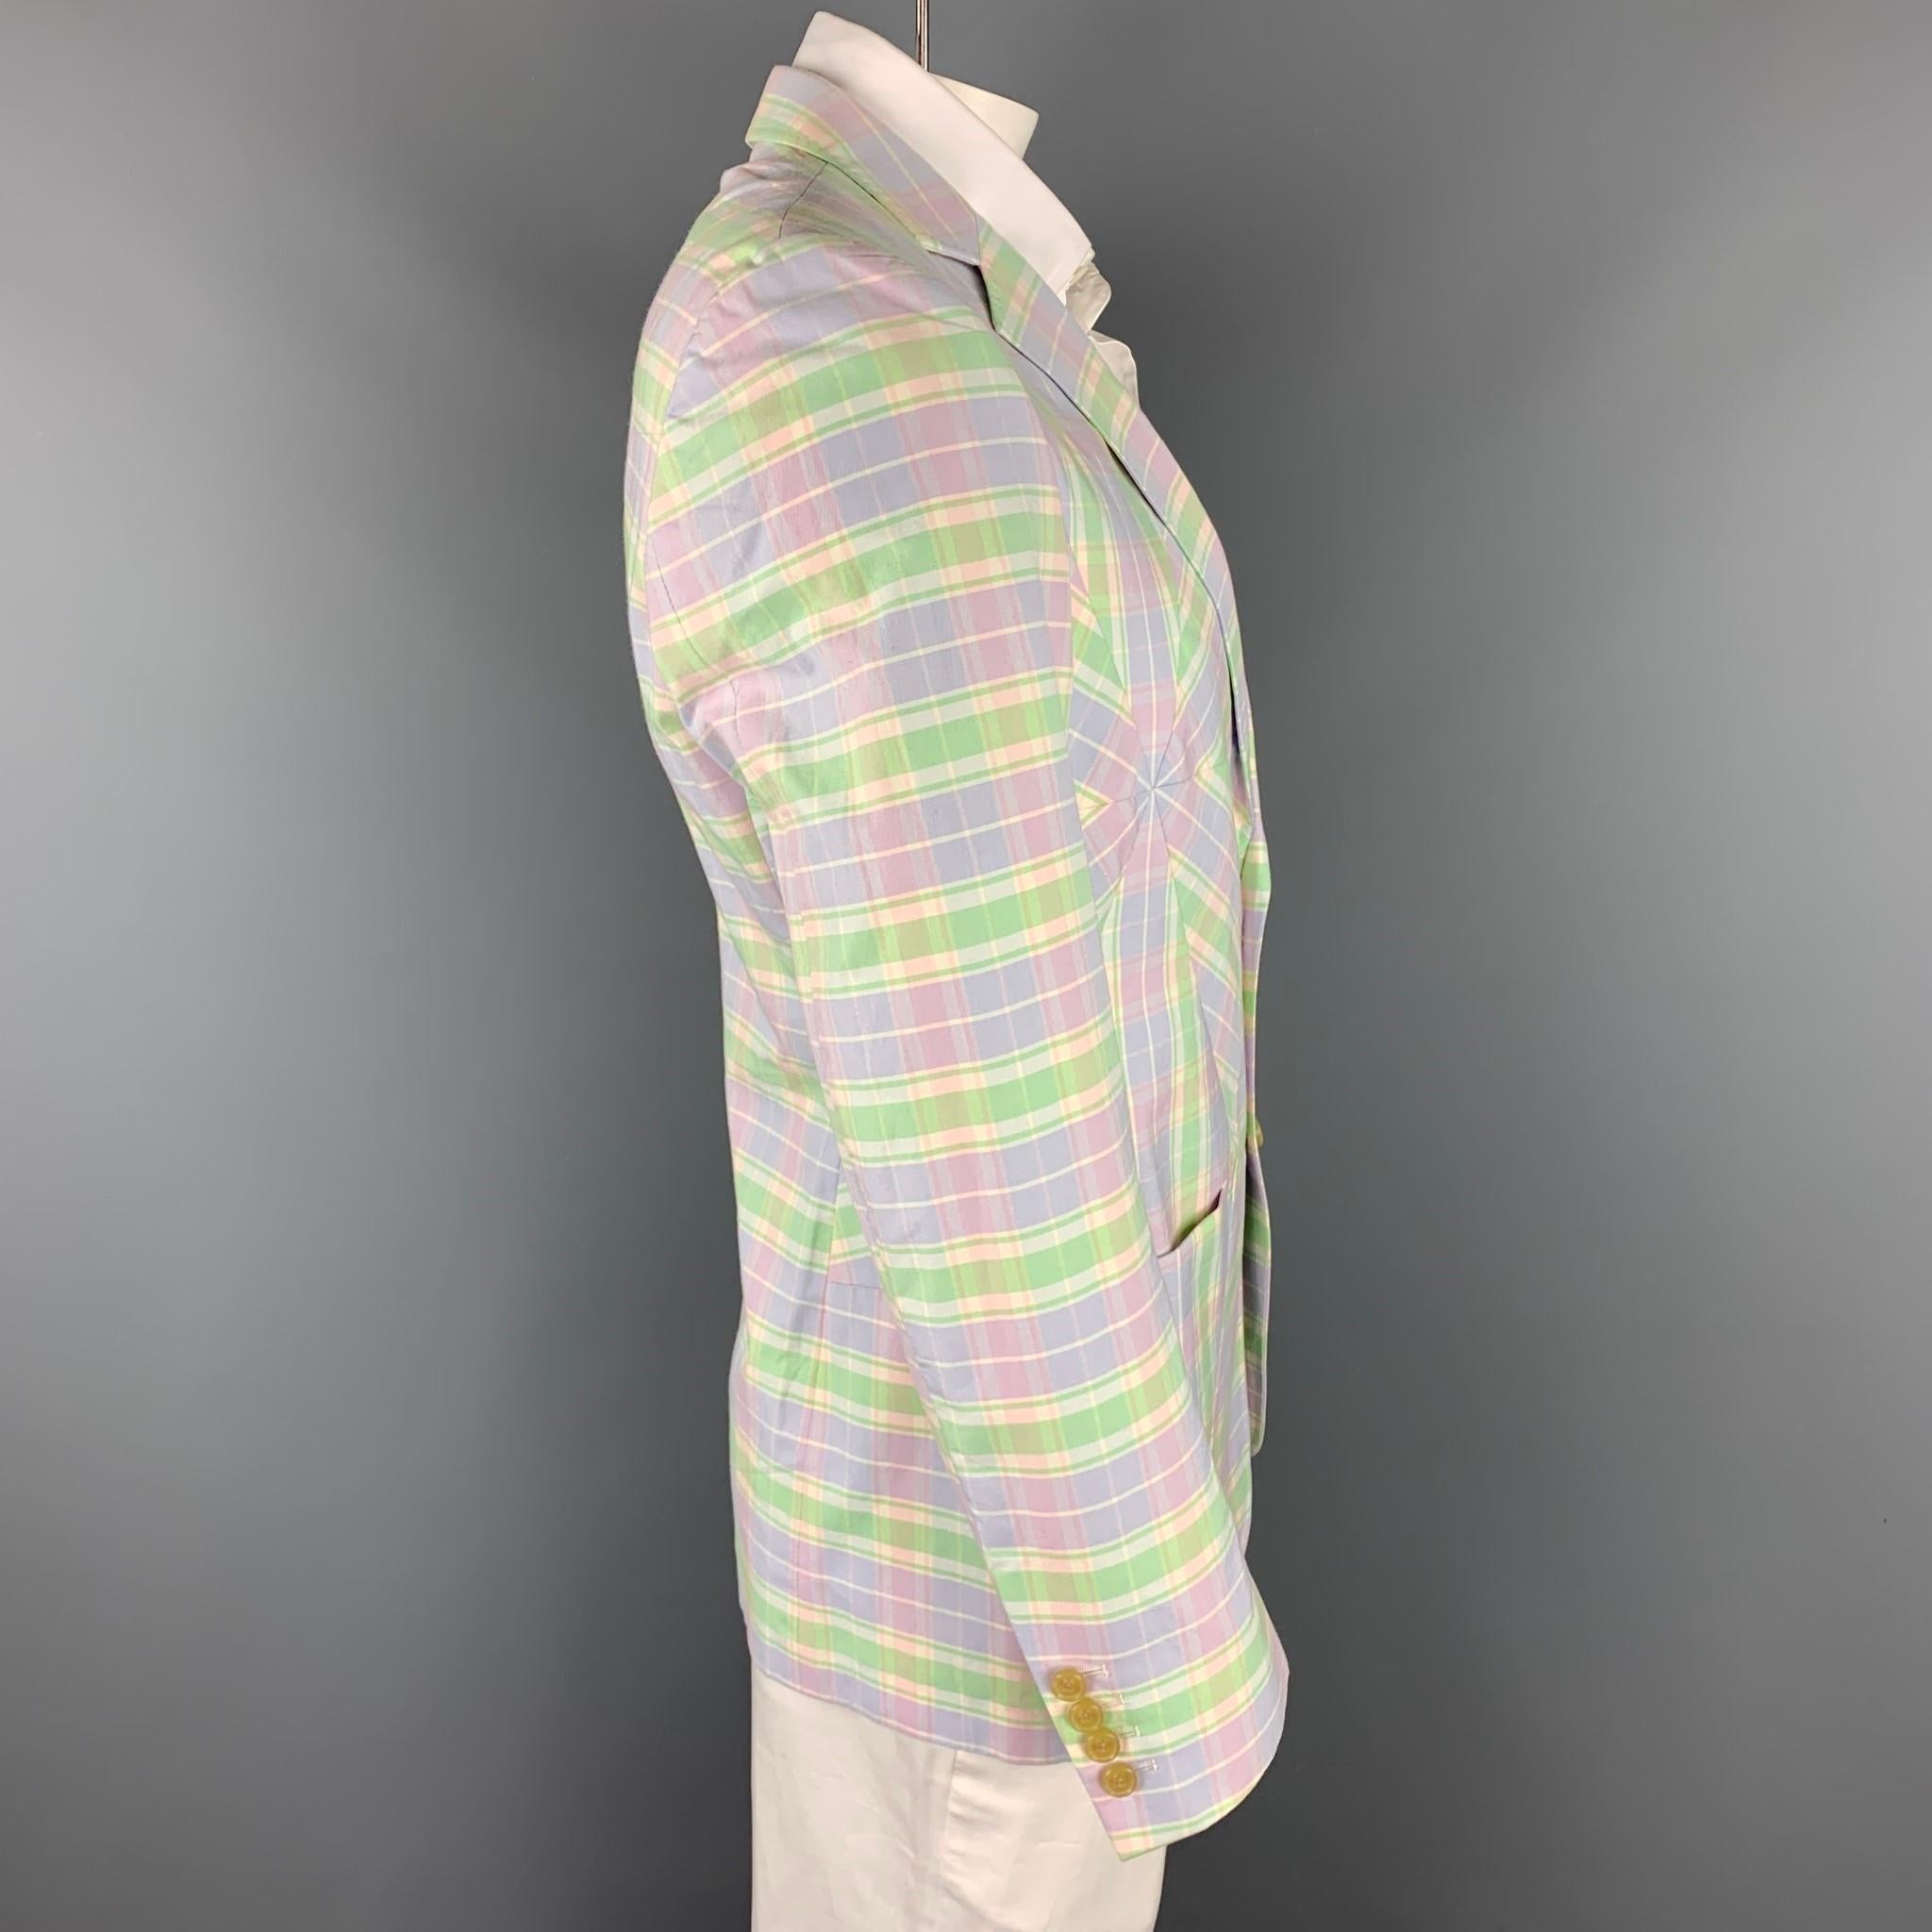 WALTER VAN BEIRENDONCK sport coat comes in a lavender & green patchwork cotton with a full liner featuring a notch lapel, front pockets, and a double button closure. Made in Belgium.

Good Pre-Owned Condition.
Marked: 52

Measurements:

Shoulder: 18